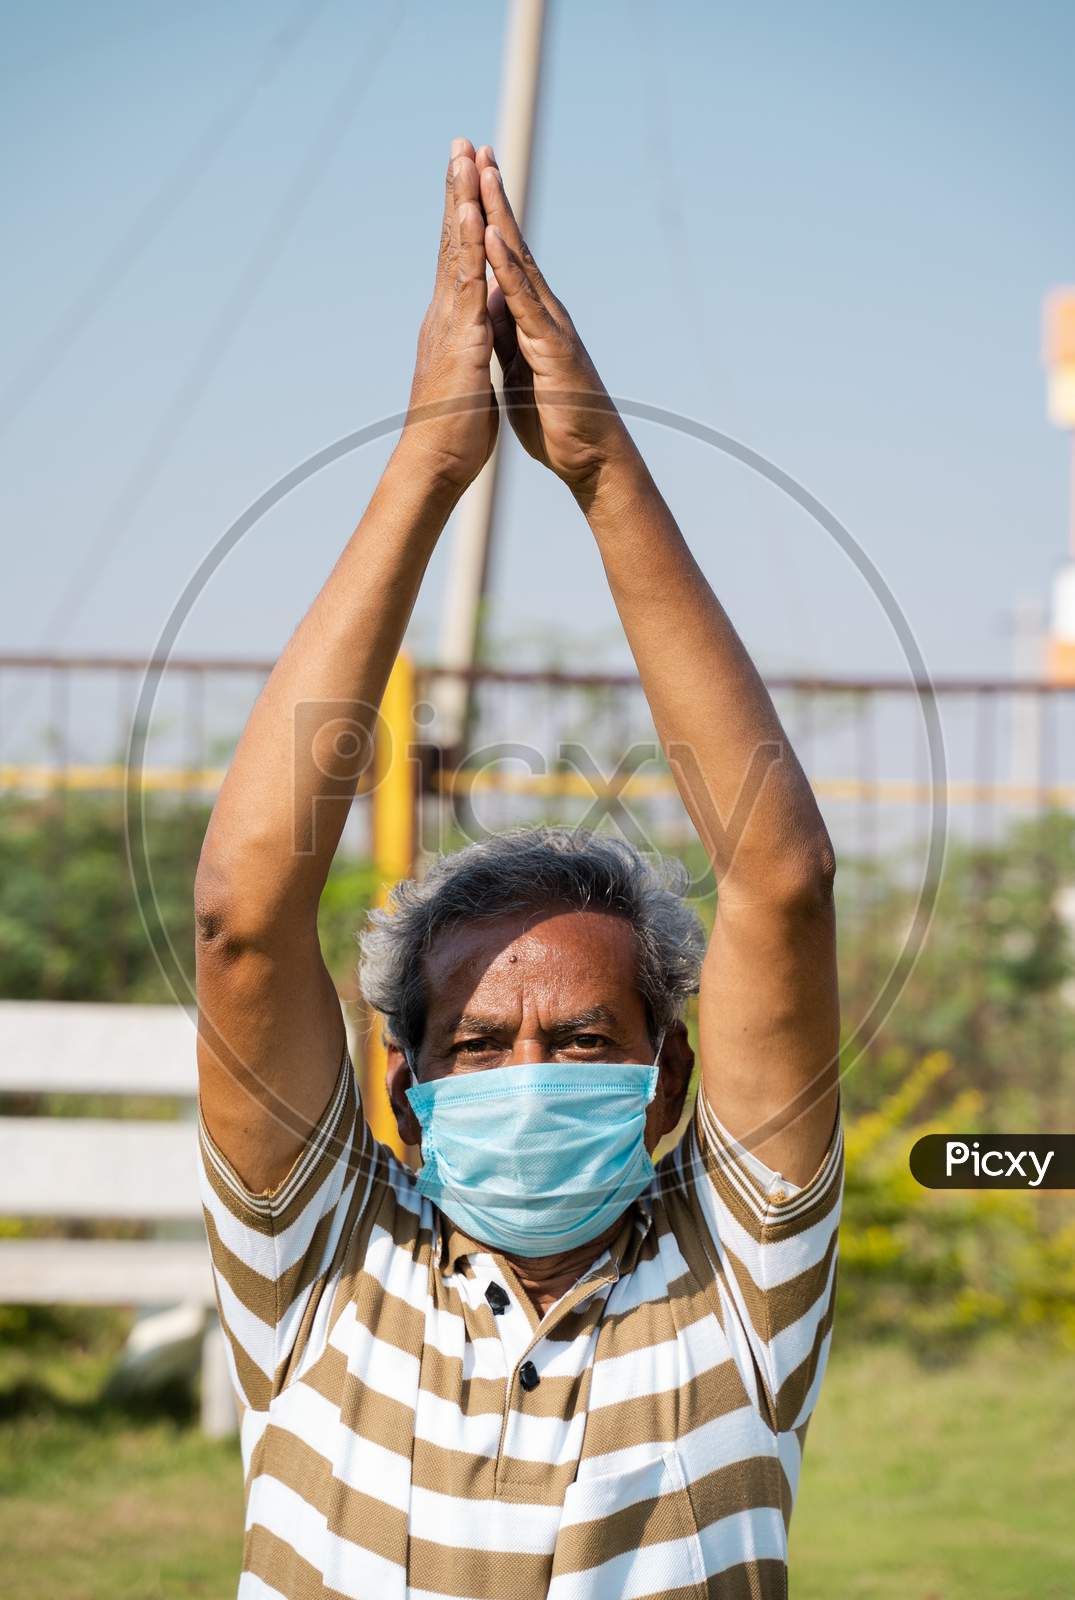 Old Man With Medical Face Mask Busy Doing Surya Namaskara Yoga Or Exercise During Morning - Concept Of Senior People Fitness Workout And Healthcare During Coronavirus Coivd-19 Pandemic